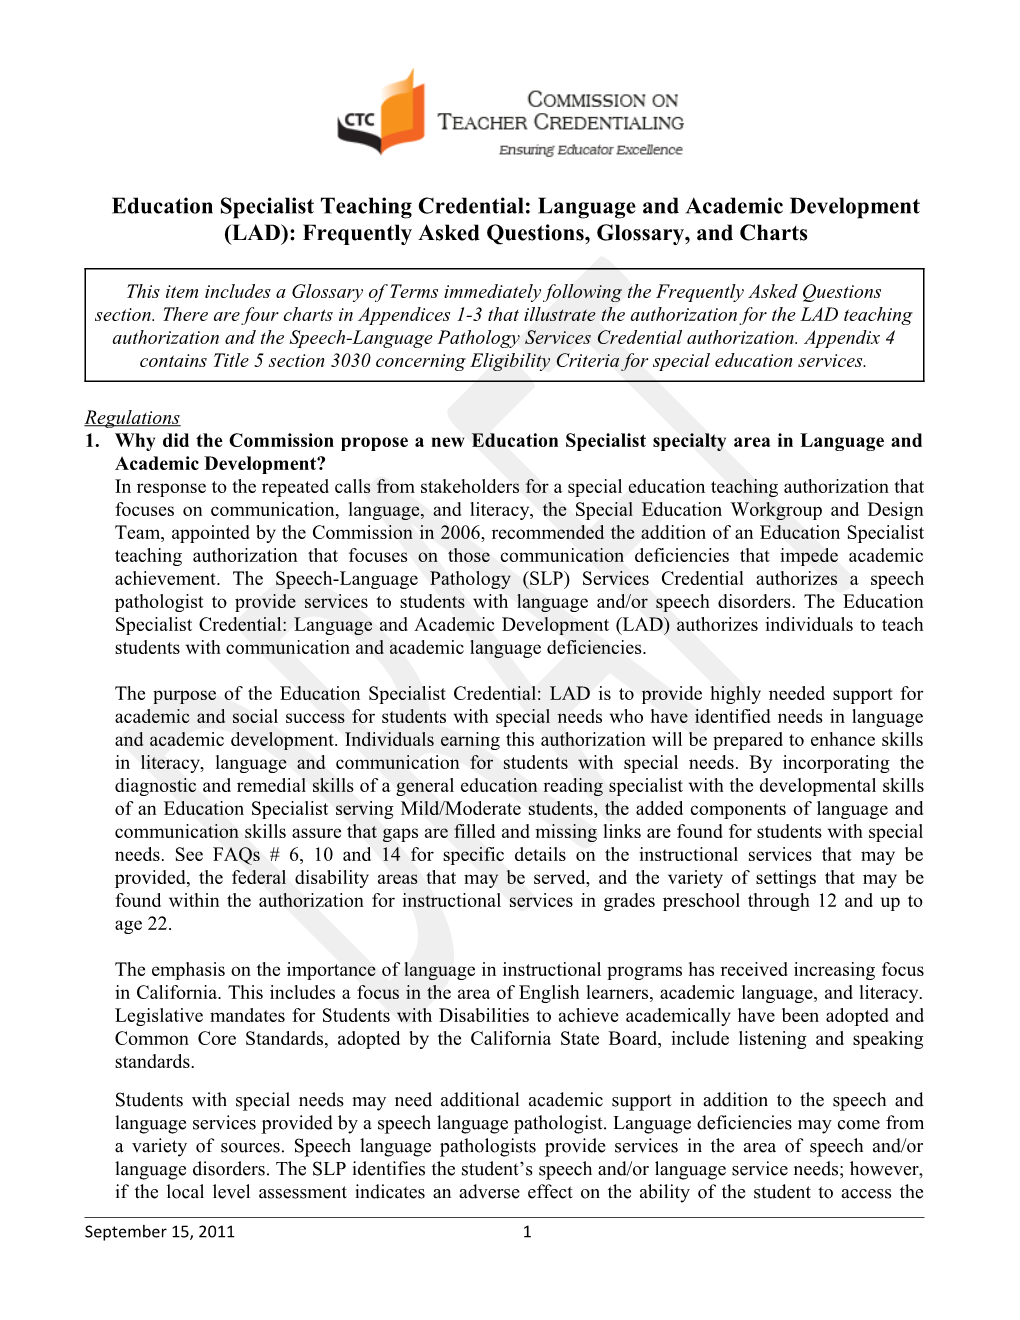 Education Specialist Teaching Credential: Language and Academic Development (LAD): Frequently